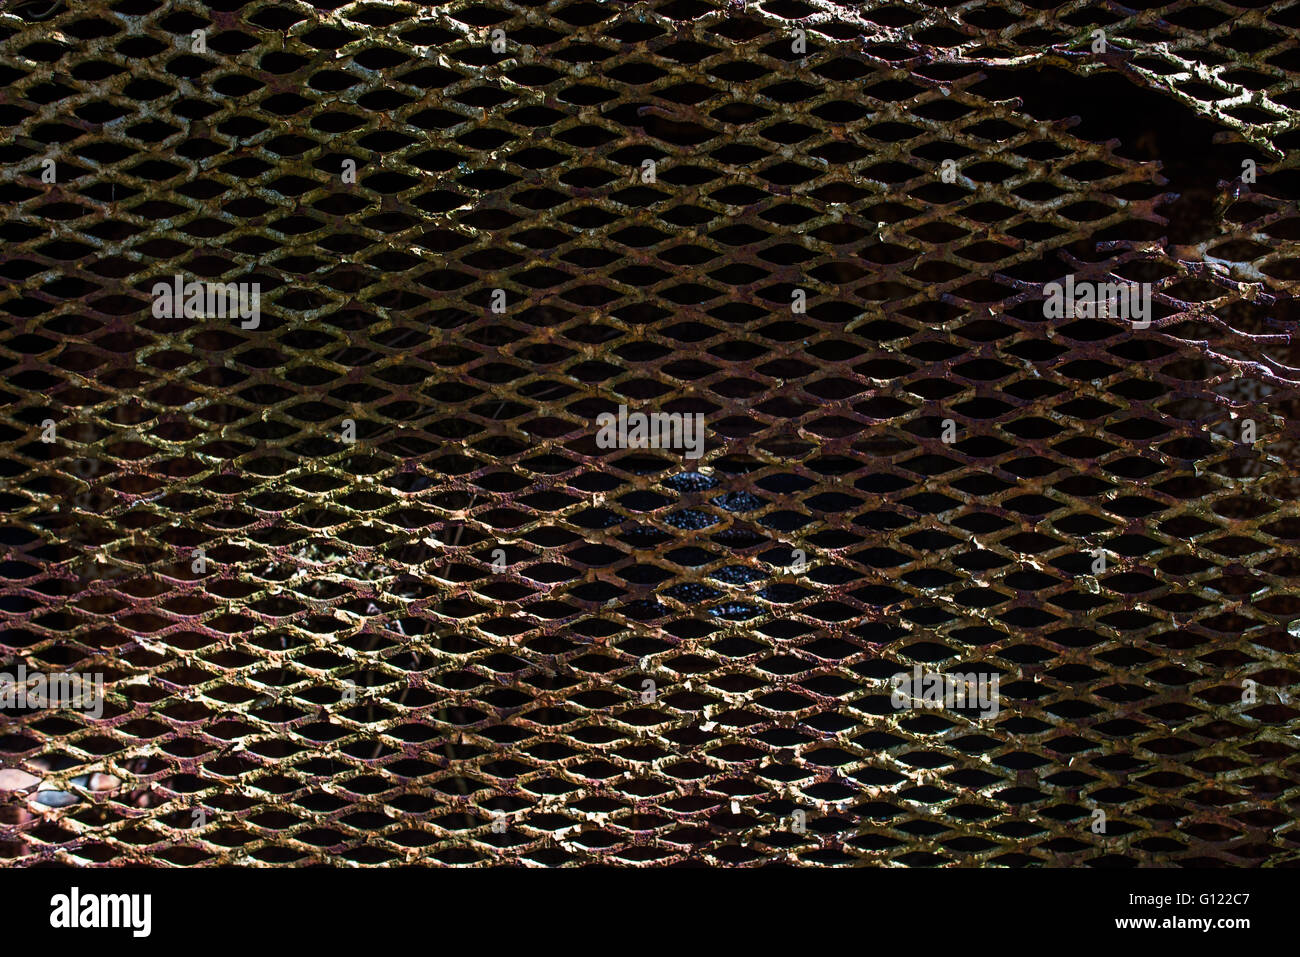 Corroded and rusting metal mesh - clearwell caves. Stock Photo